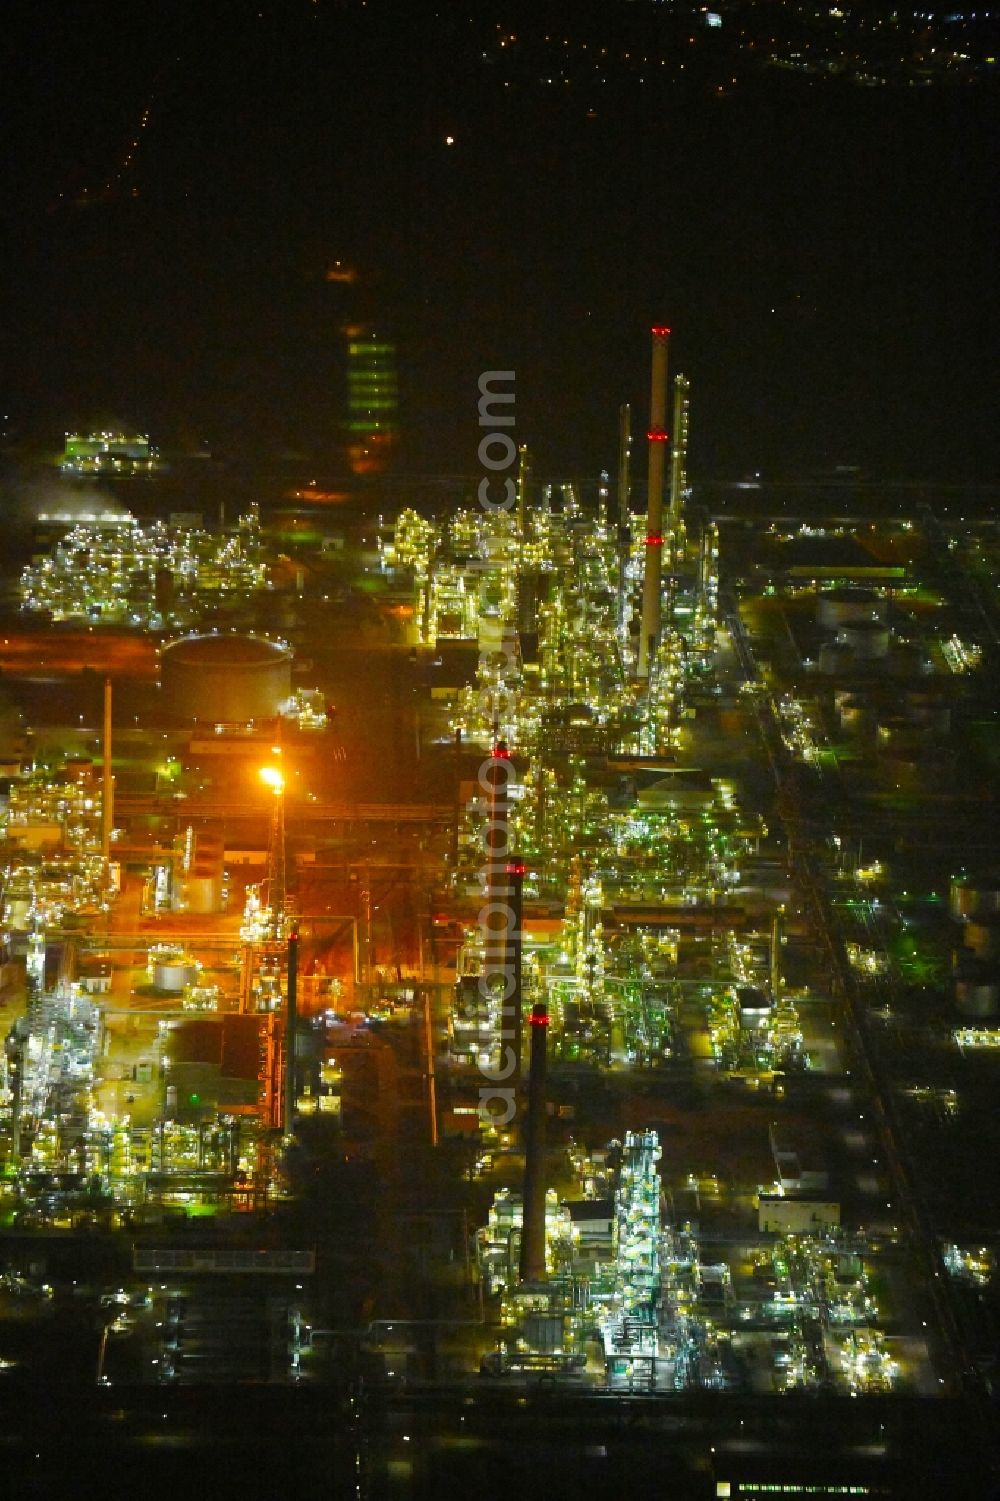 Aerial photograph at night Schwedt/Oder - Night lighting Site of PCK Refinery GmbH, a petroleum processing plant in Schwedt / Oder in the northeast of the state of Brandenburg